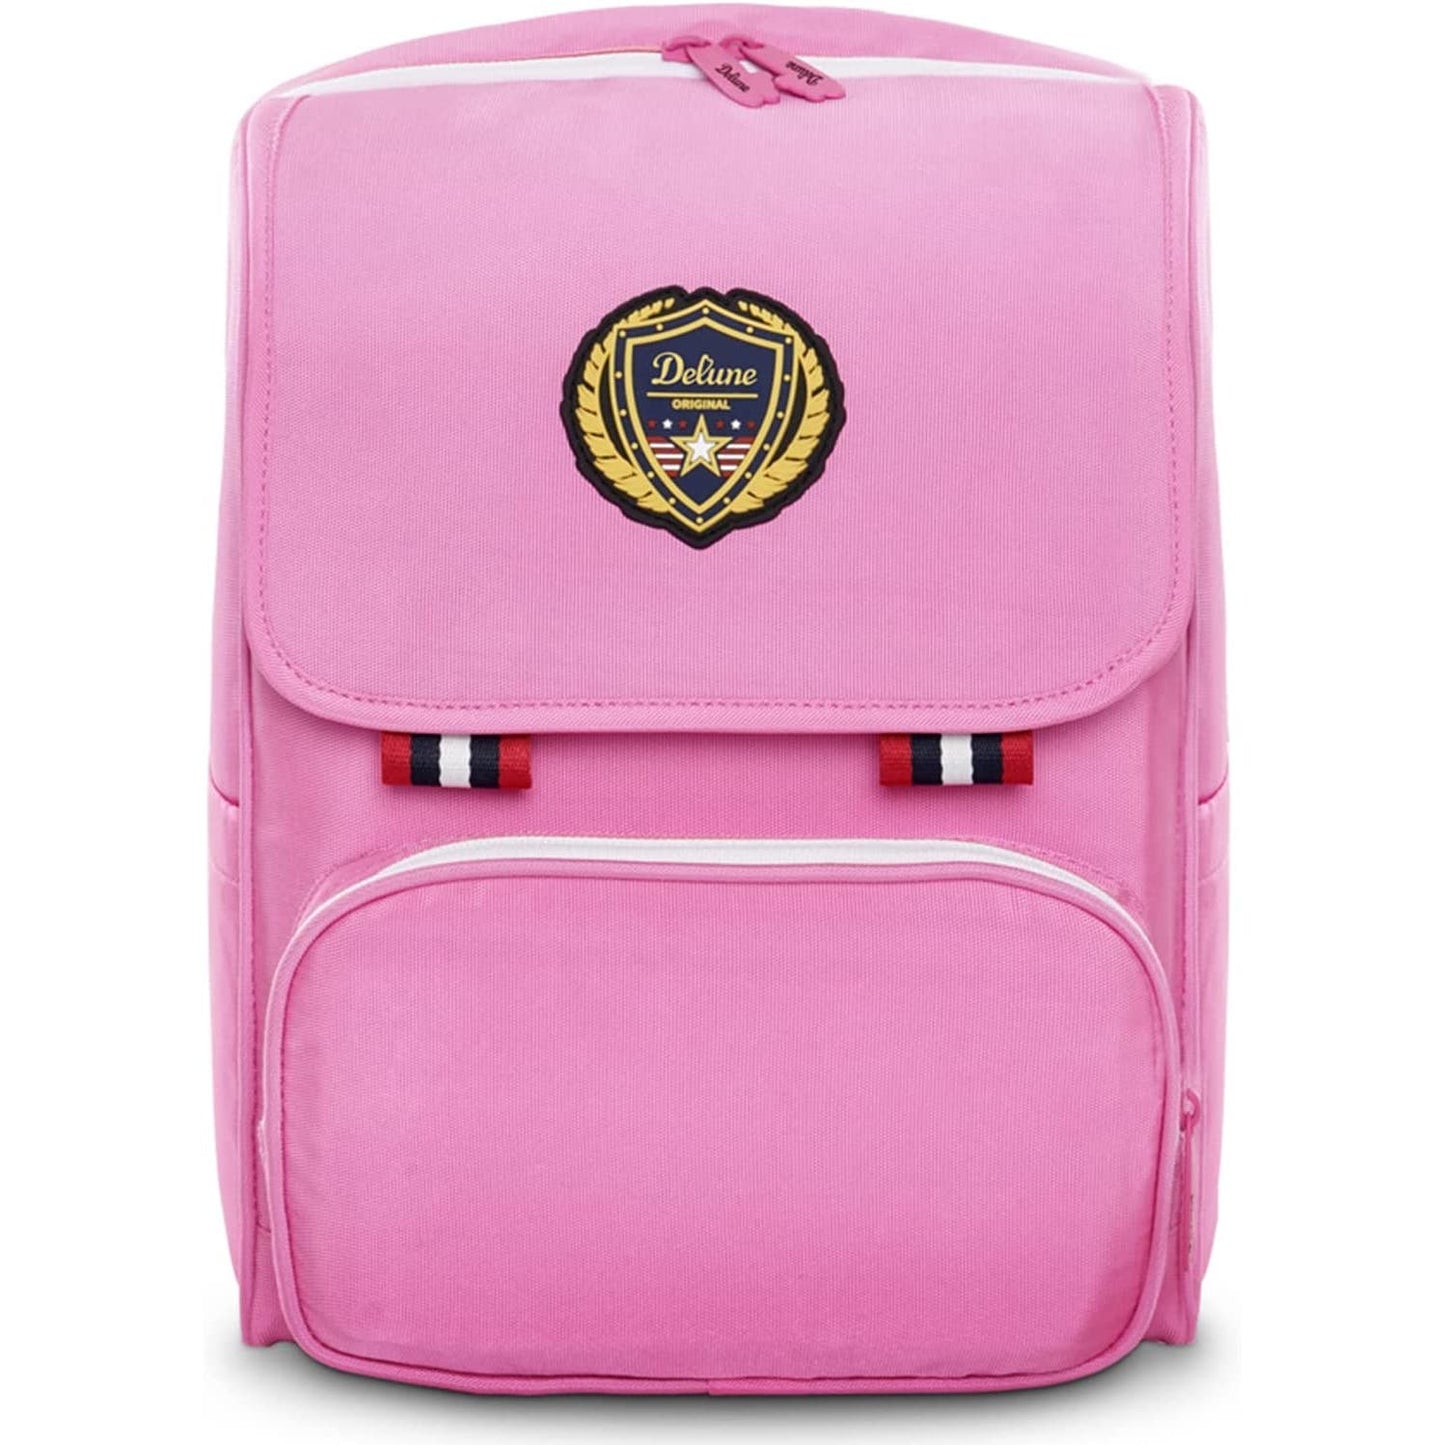 SALE!!! DELUNE Pink Backpack LIGHT Weight with Pencil Case - ORTHOPEDIC